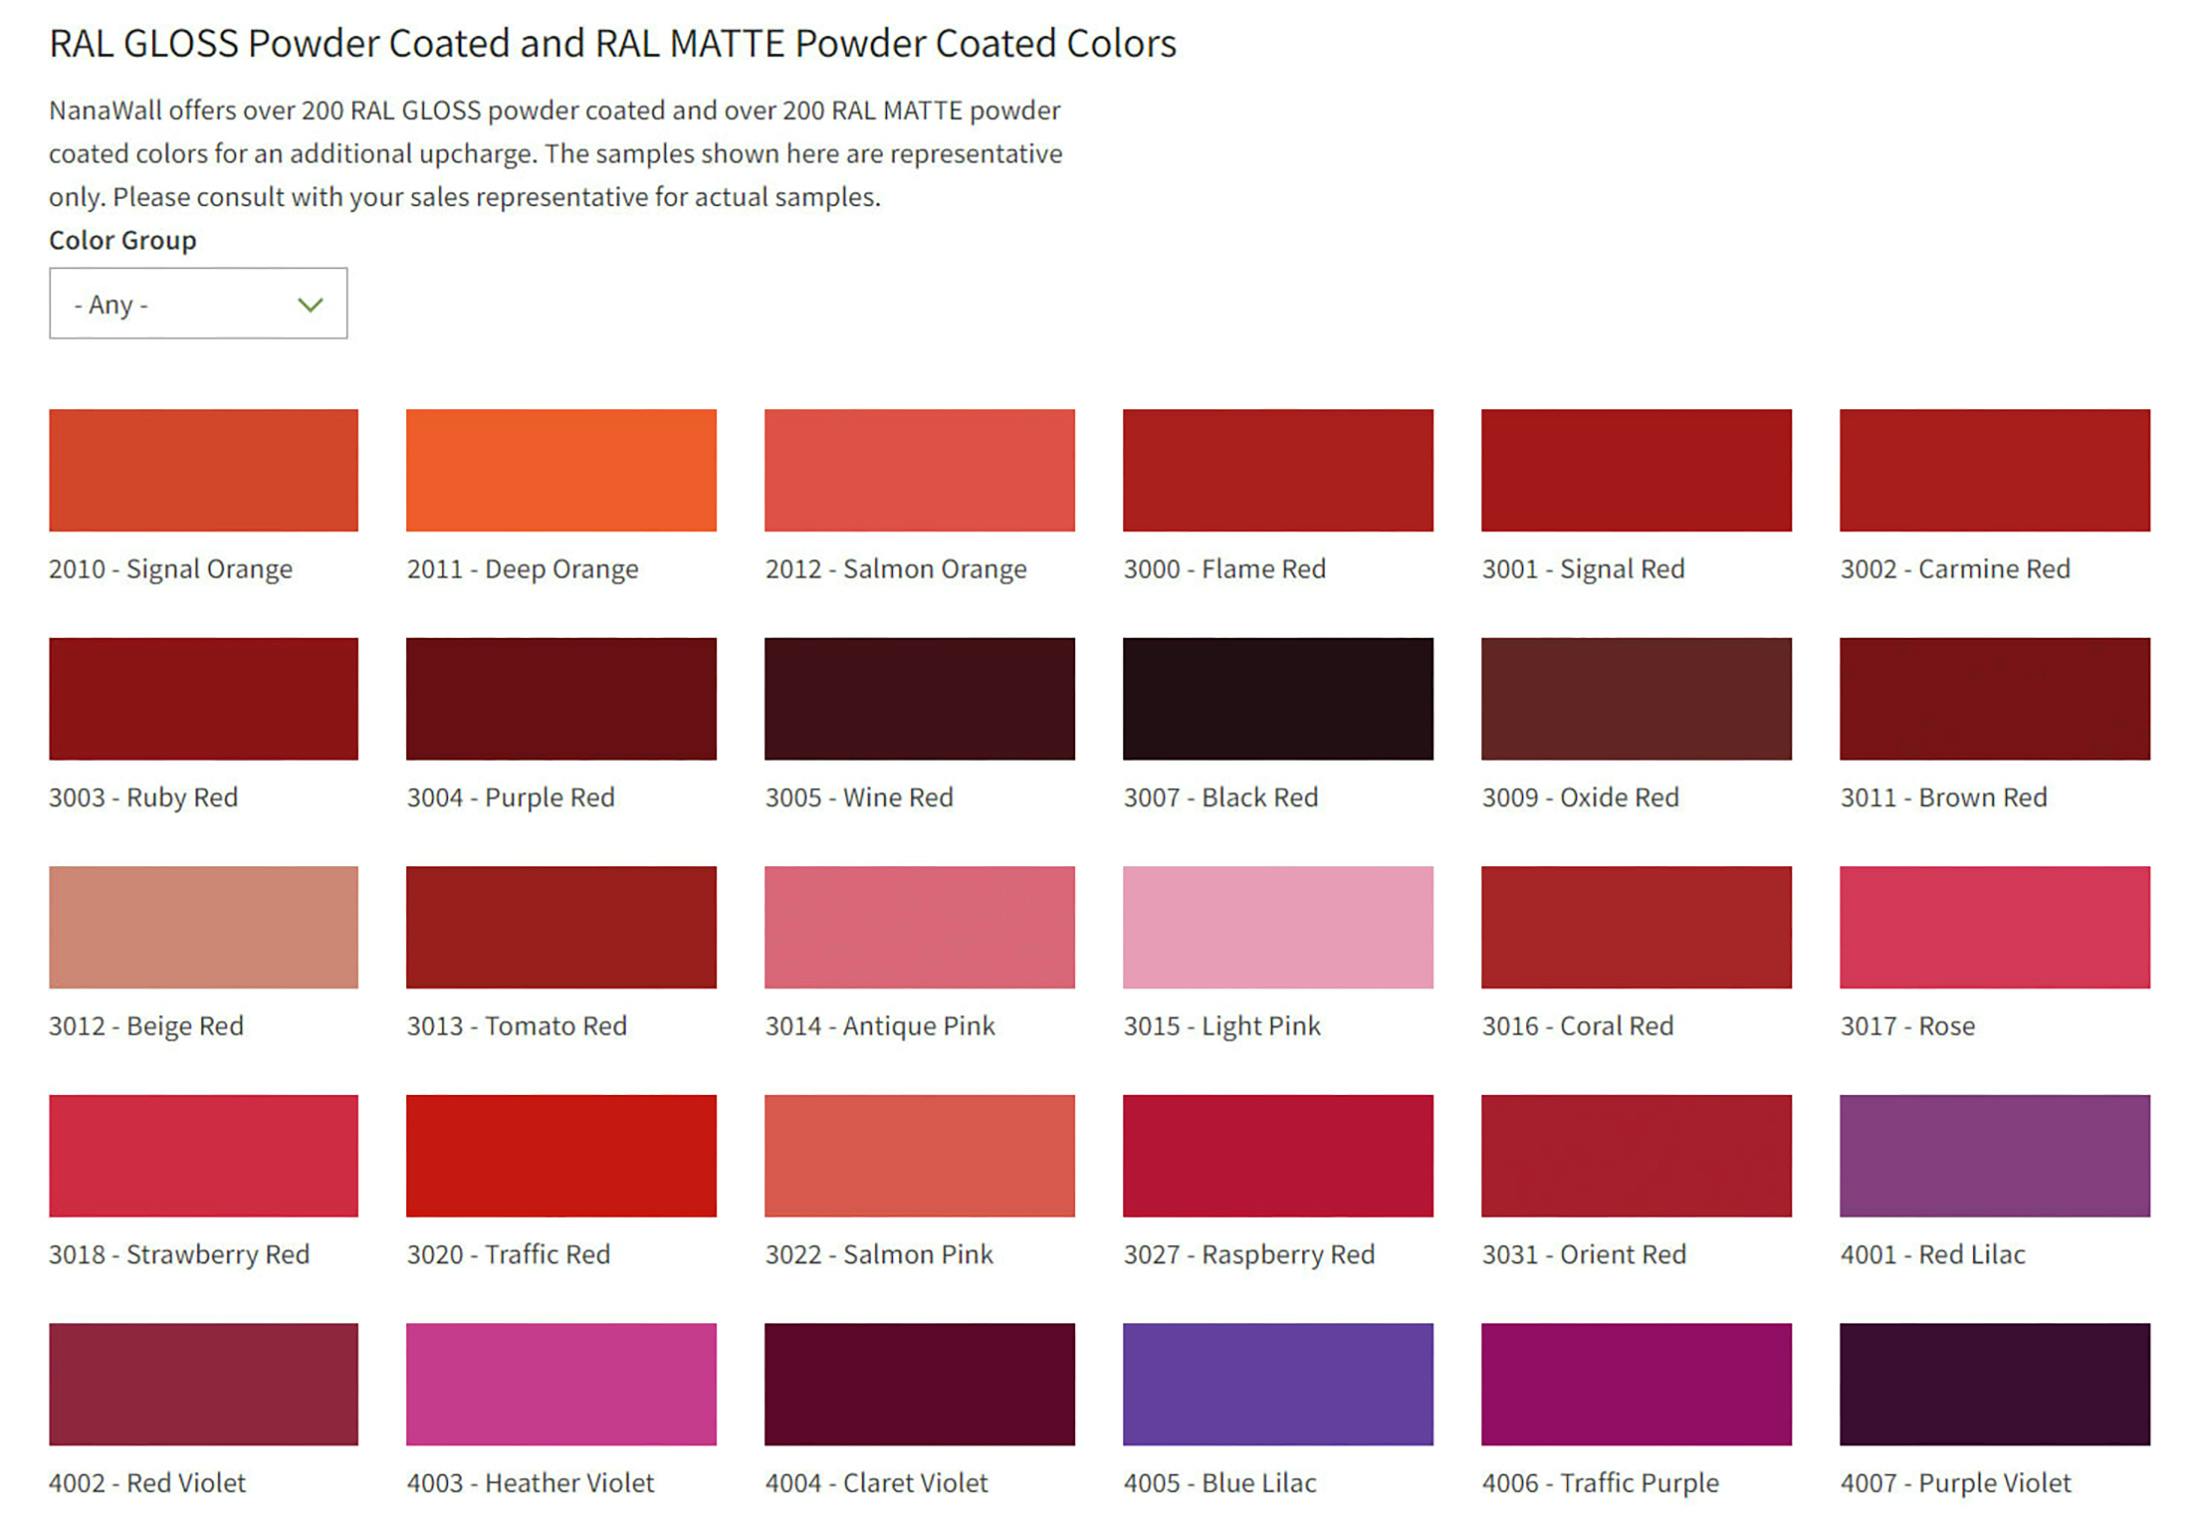 Barbie RAL powder coat colors for NanaWall glass wall systems